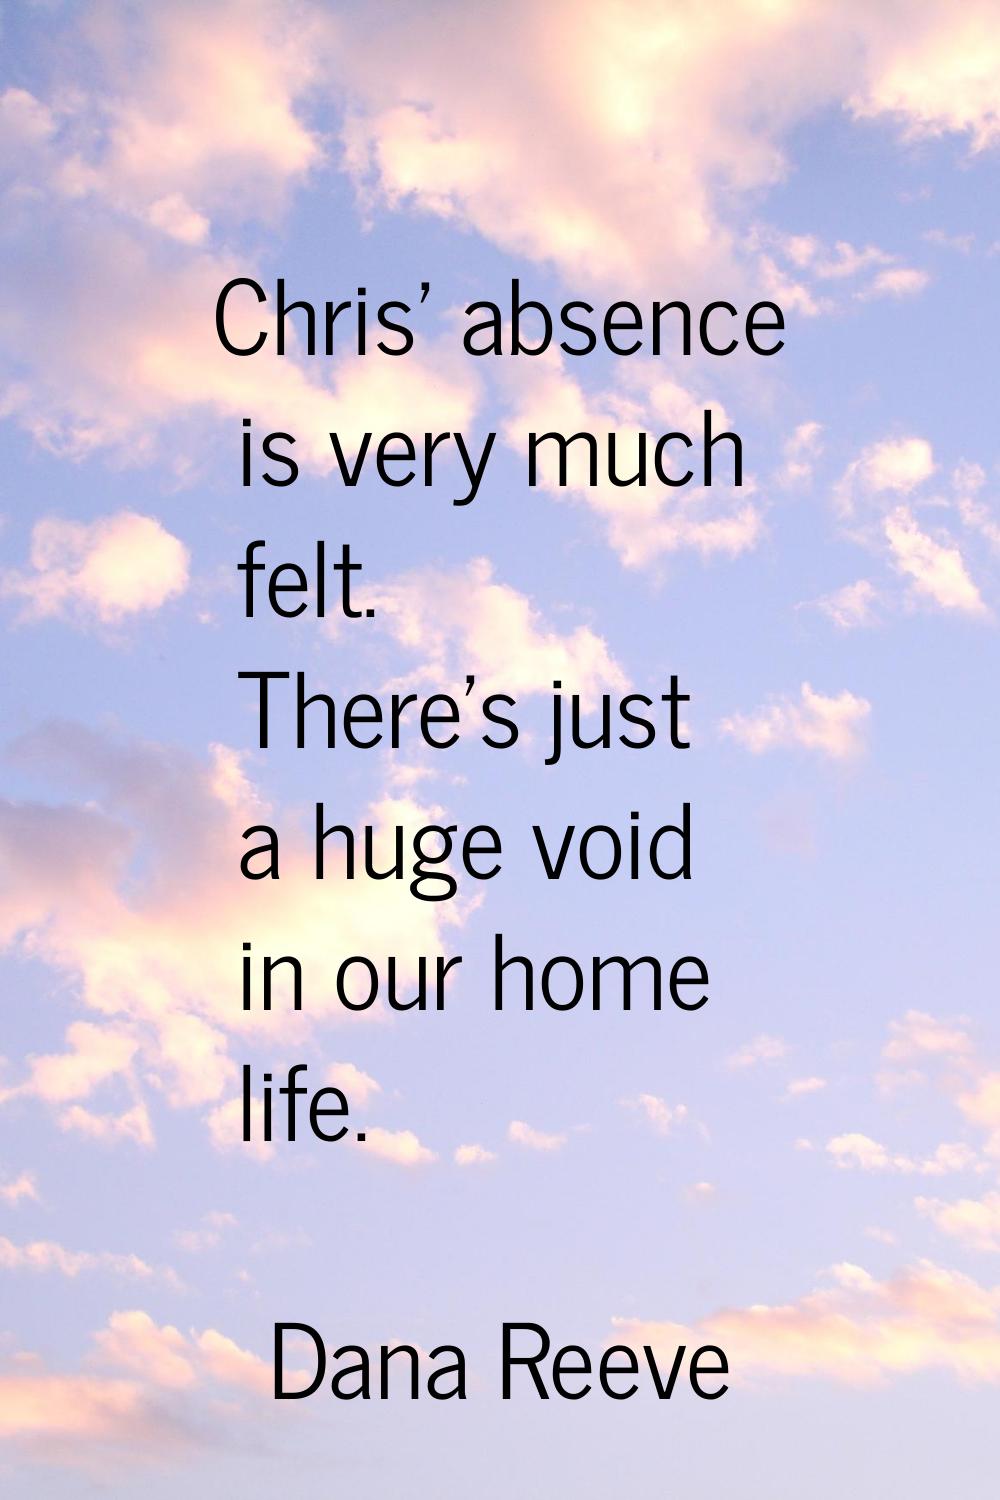 Chris' absence is very much felt. There's just a huge void in our home life.